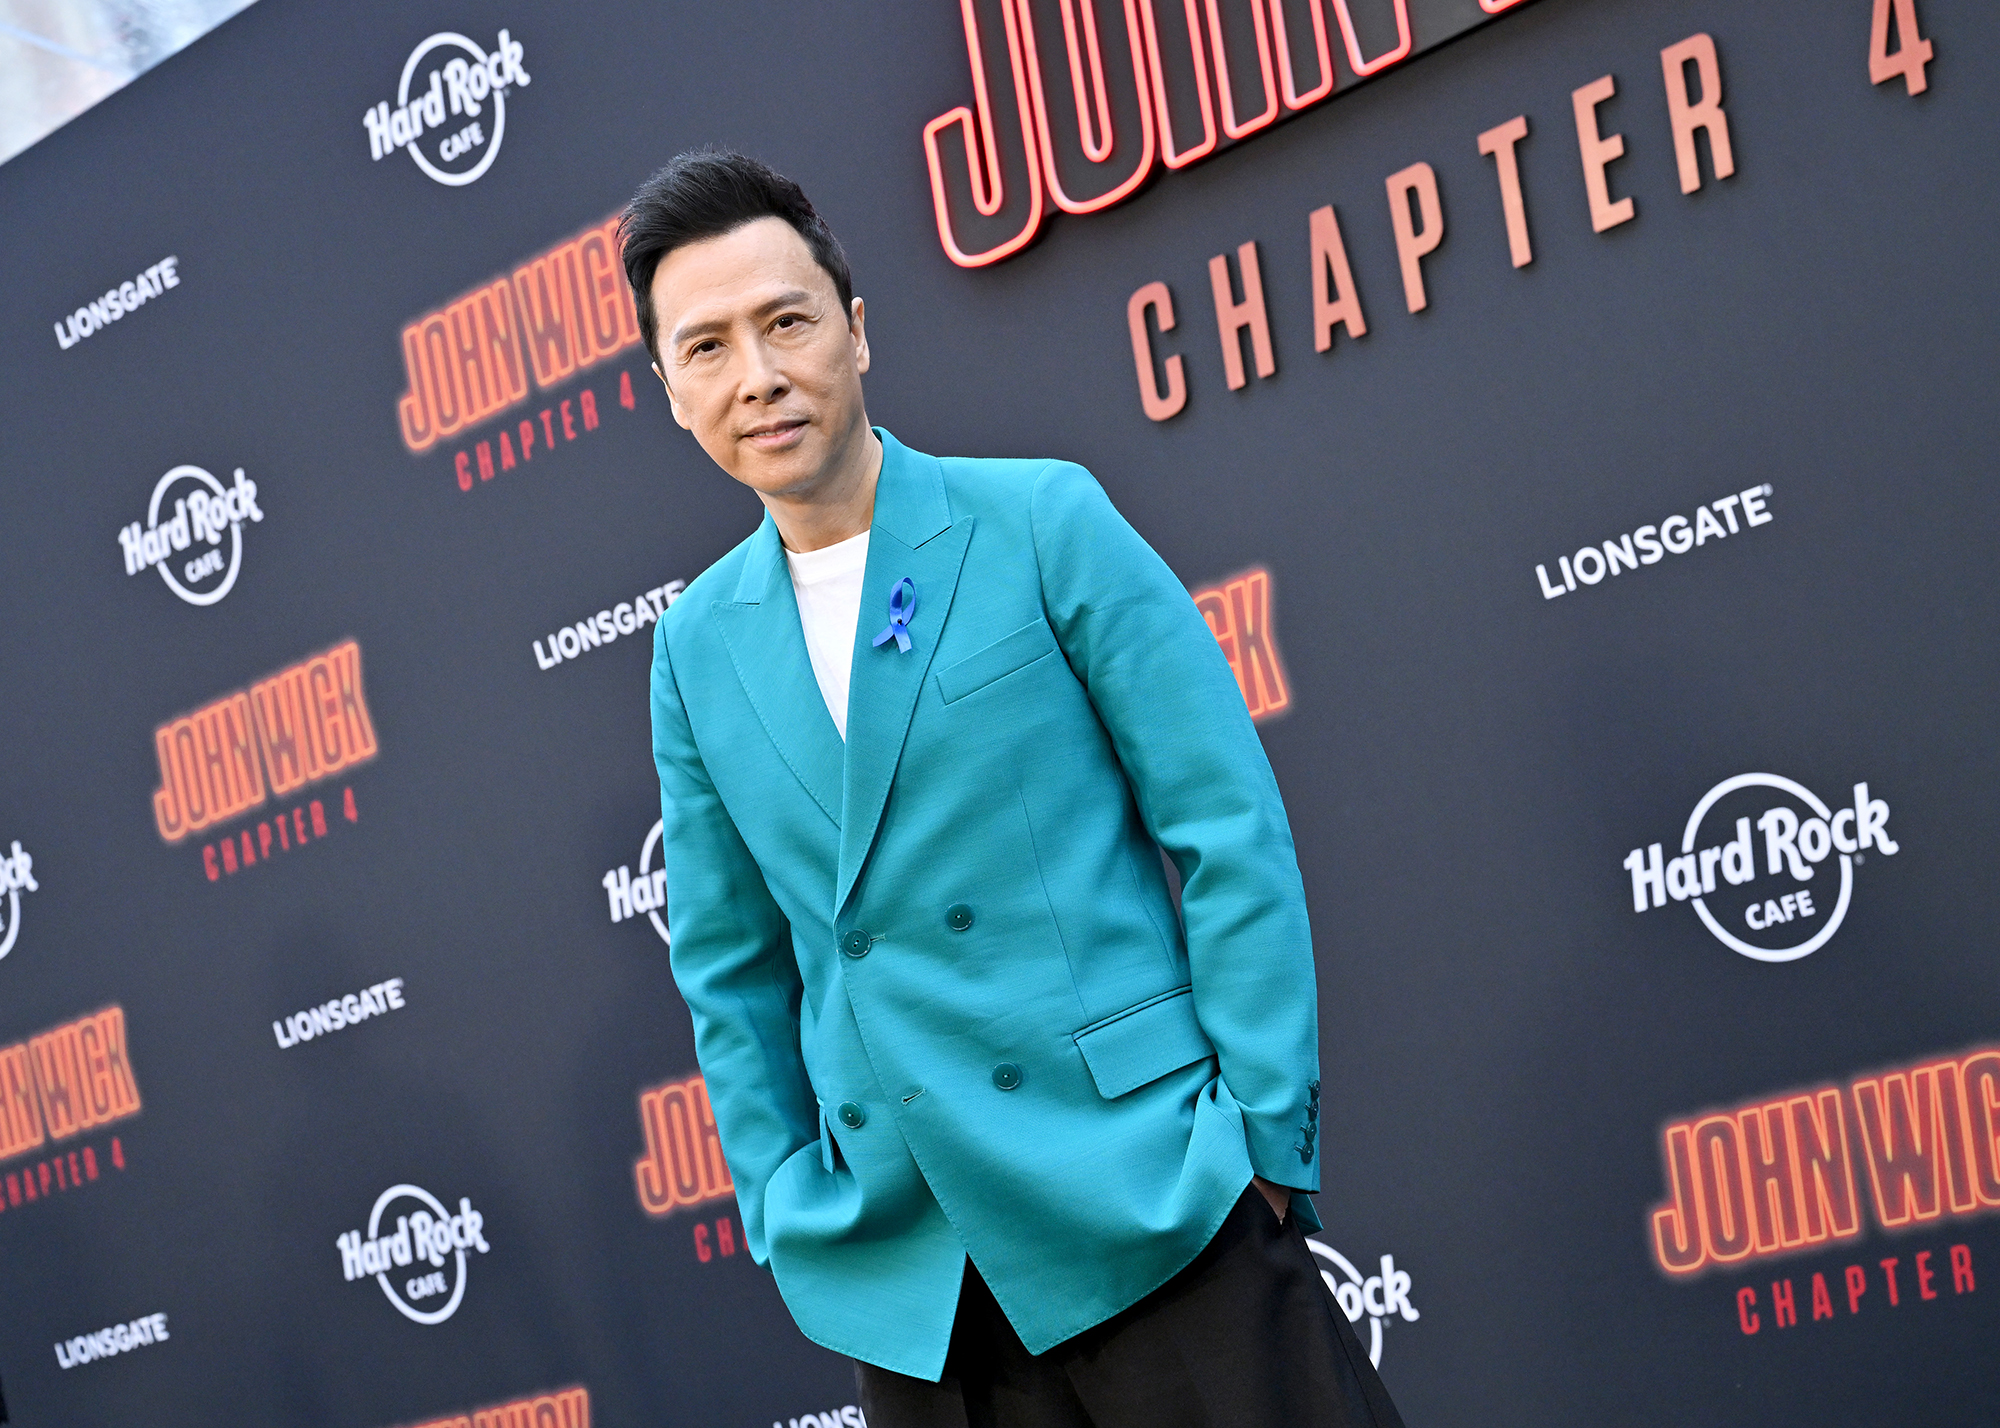 celebrity image of martial arts star/actor Donnie Yen outside of the March 2023 premiere for "John Wick: Chapter 4." Yen is wearing a white shirt underneath an aqua-colored jacket, with his hands in the pockets of his dark-colored pants as he poses for a shot on the red carpet.